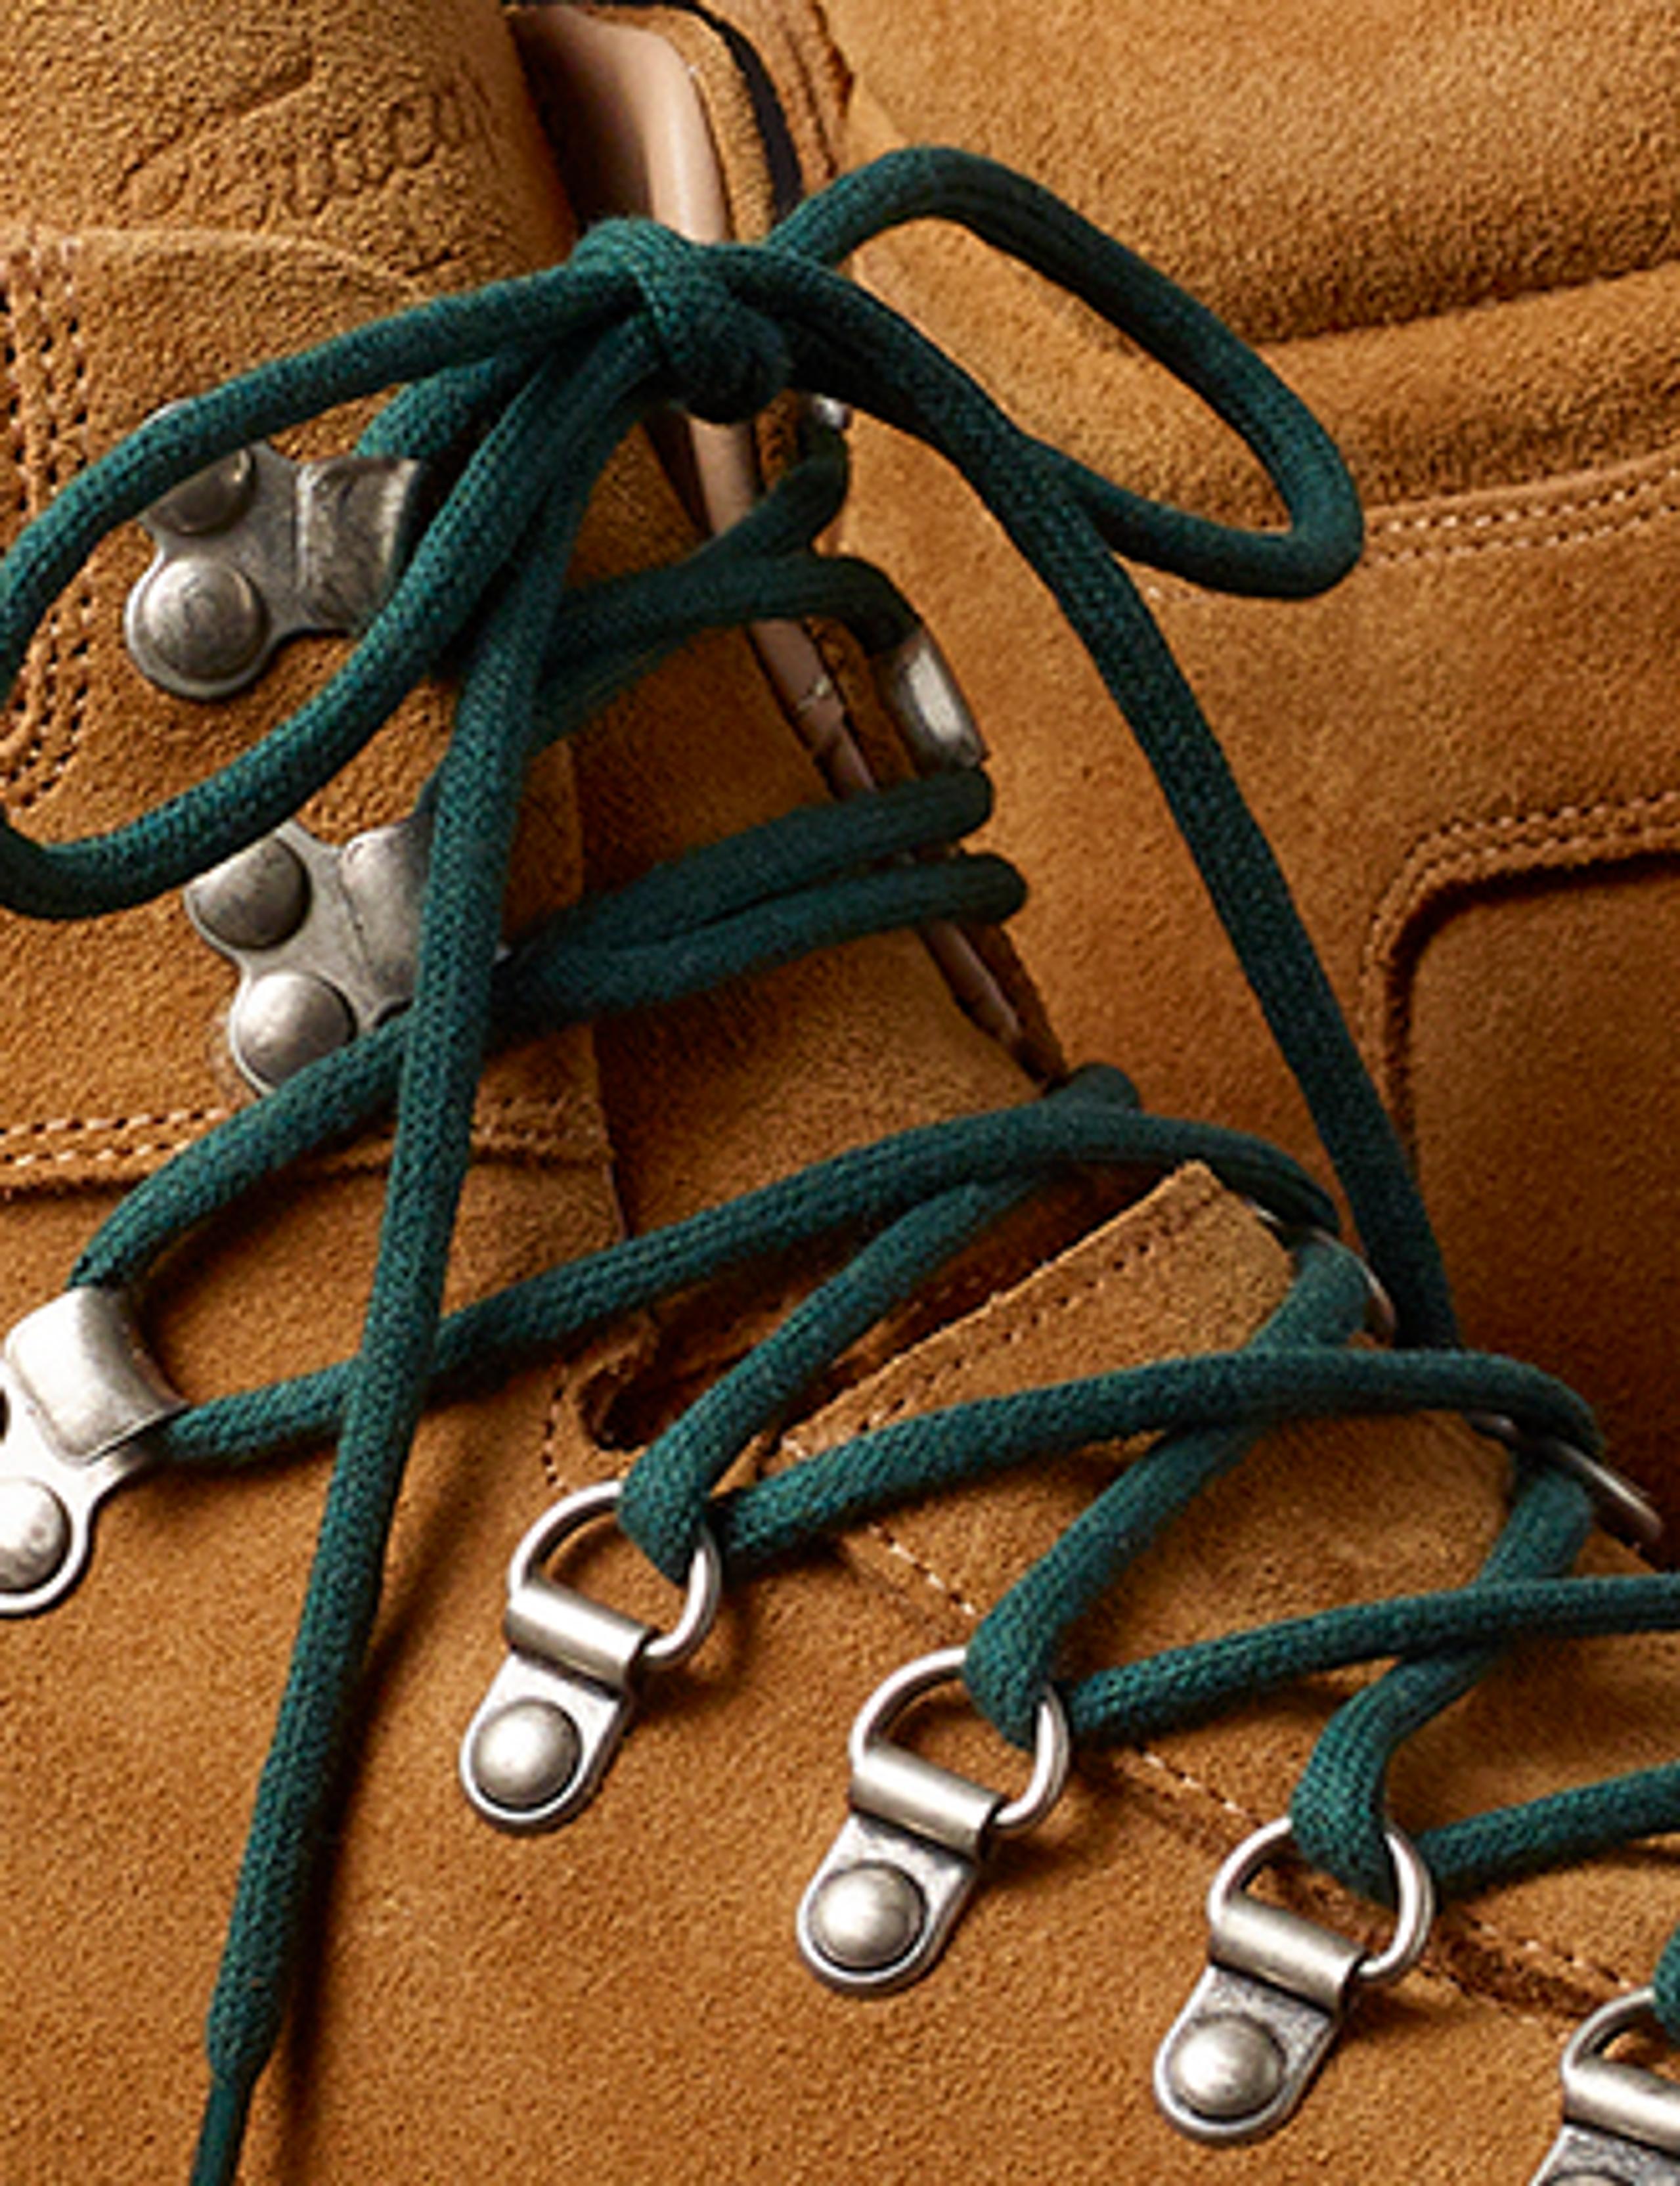 Detail of Dolomite Boot laces